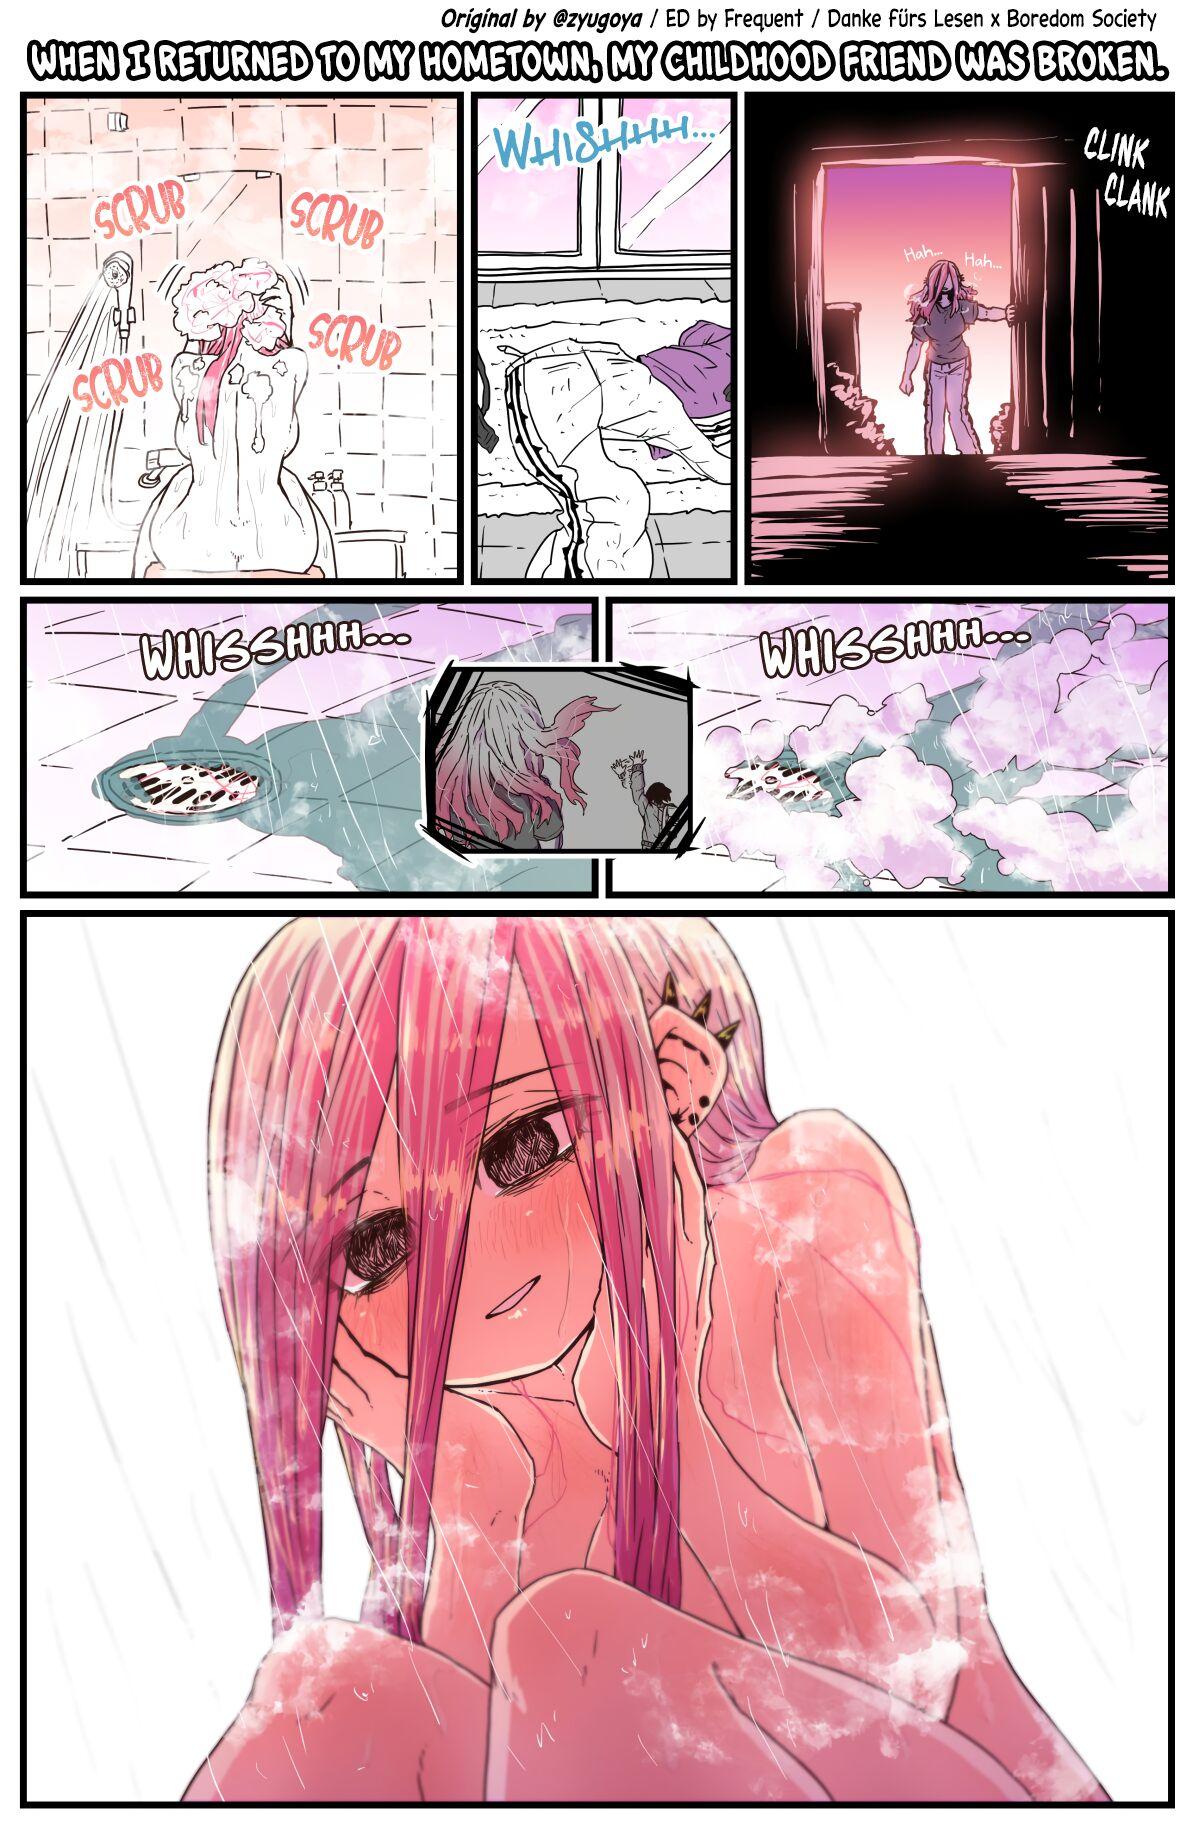 Cowgirl When I Returned to My Hometown, My Childhood Friend was Broken - Original Highschool - Page 4